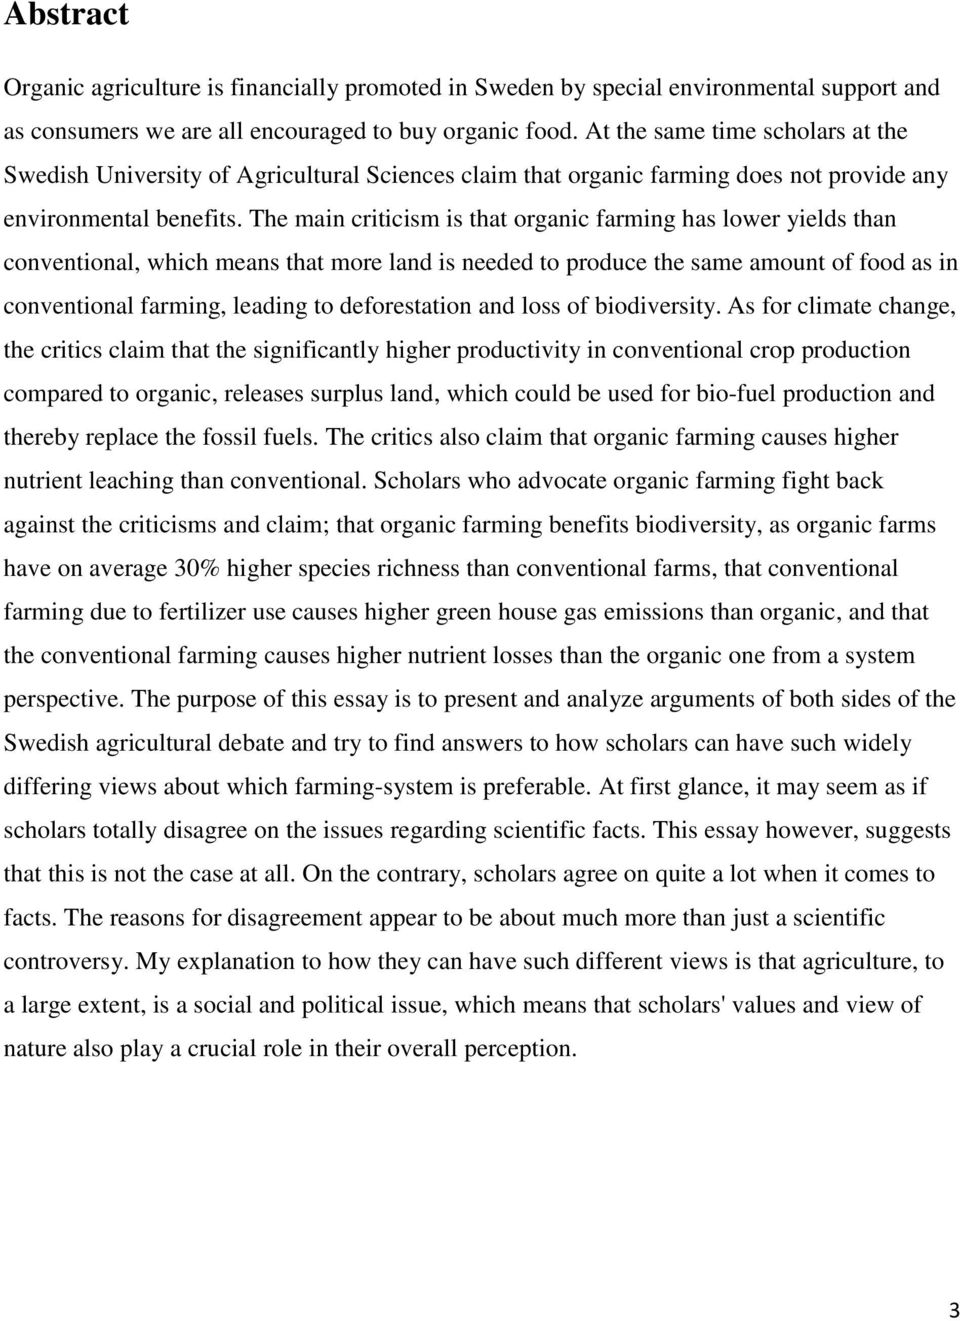 The main criticism is that organic farming has lower yields than conventional, which means that more land is needed to produce the same amount of food as in conventional farming, leading to